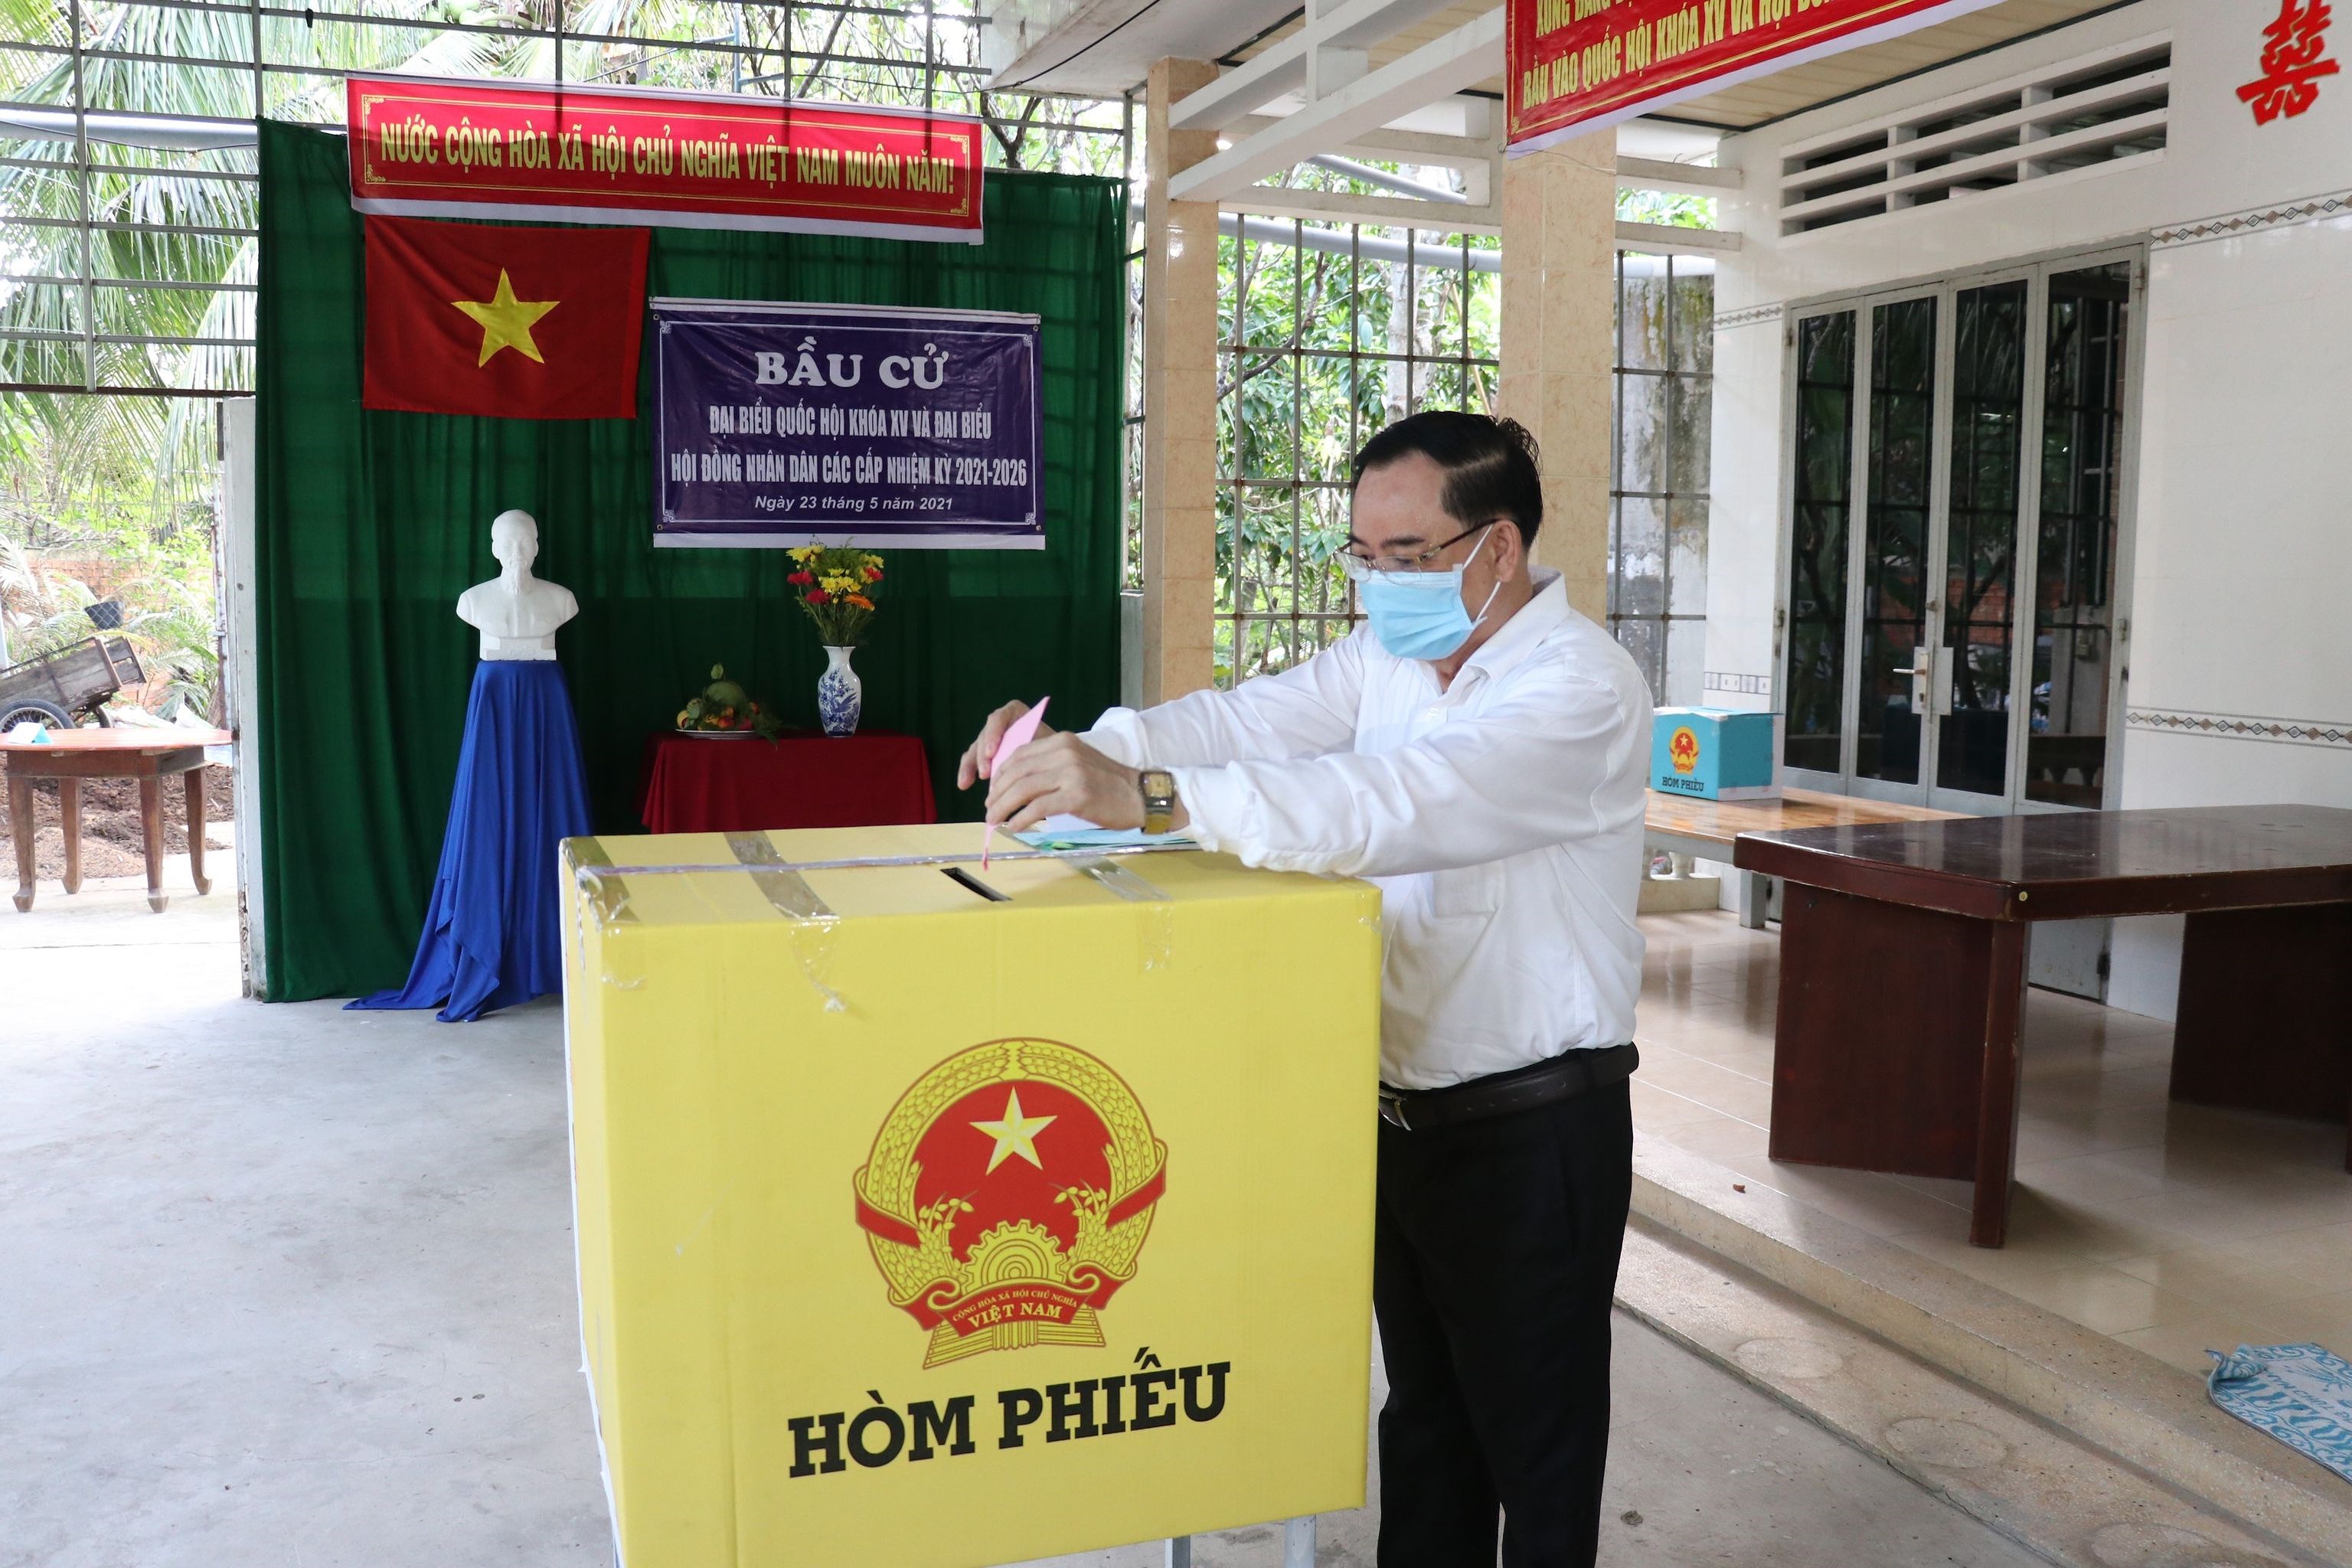 Voters nationwide cast ballots hinh anh 13